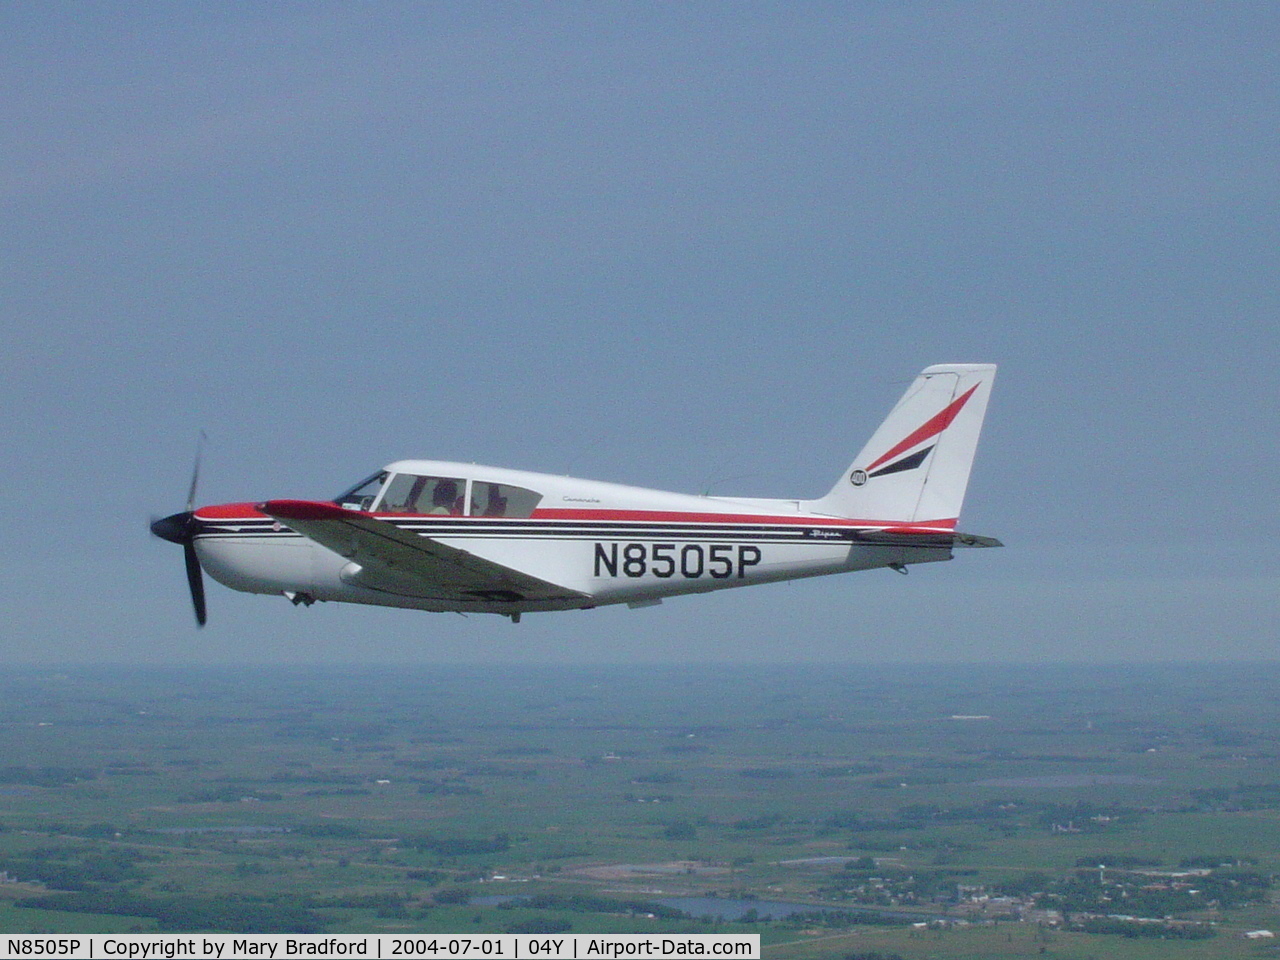 N8505P, 1964 Piper PA-24-400 Comanche 400 C/N 26-85, What a great airplane